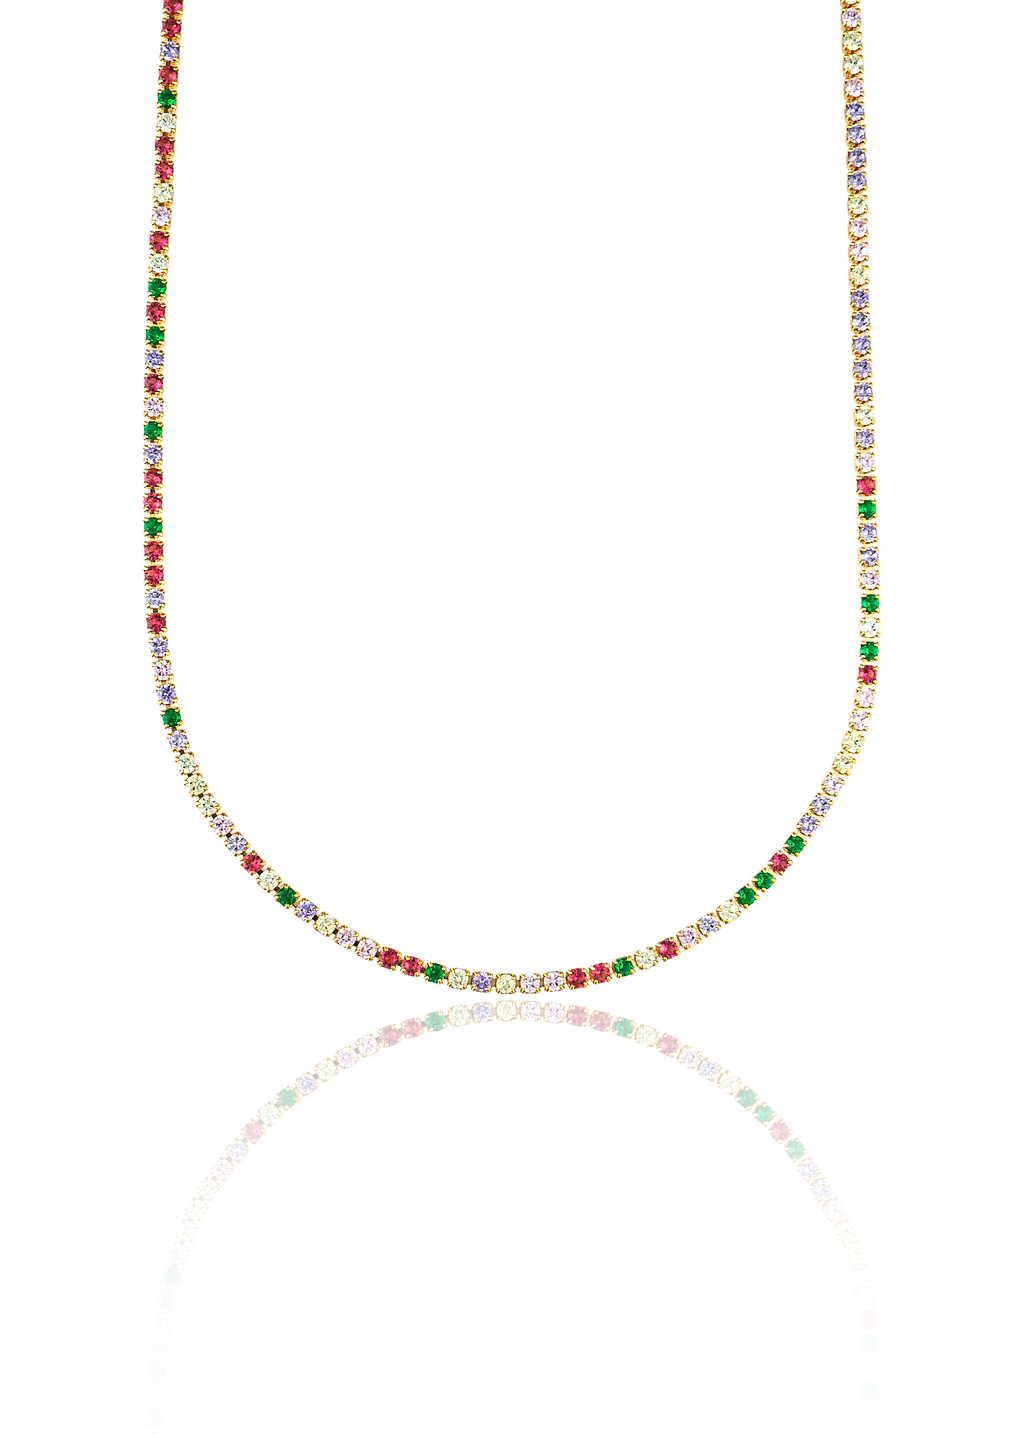 2mm Tennis Necklace Choker With Multicolor Round Clear Cubic Zirconia Stones (G209)(I435)